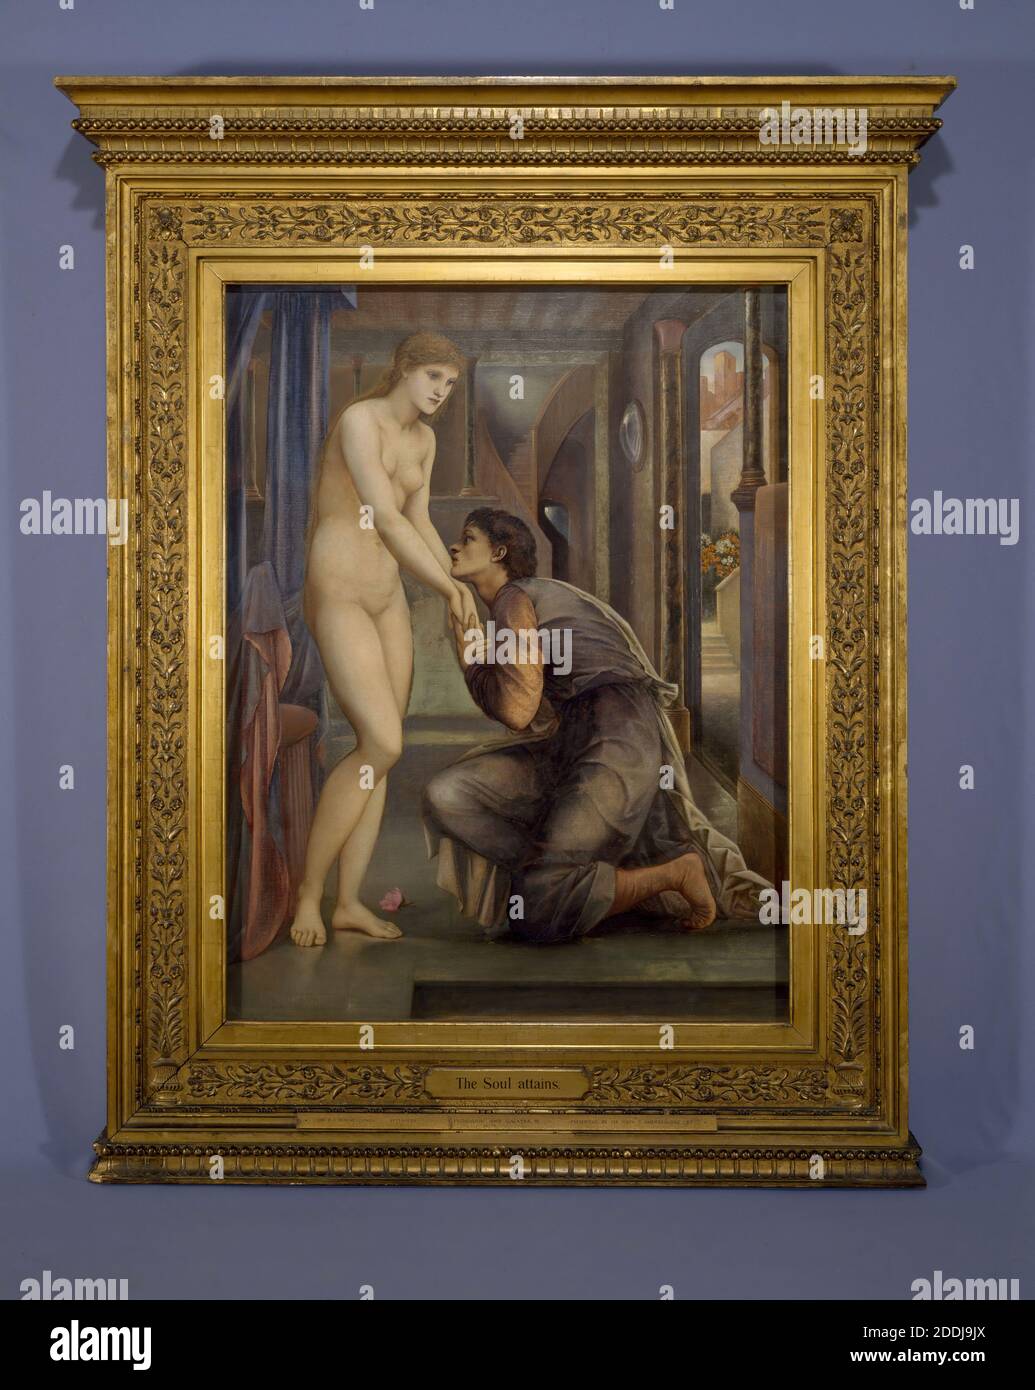 Pygmalion and the Image, The Soul Attains, 1878 Four in a series of four paintings Artist: Edward Burne-Jones Oil On Canvas, Art Movement, Pre-Raphaelite, 19th Century Stock Photo